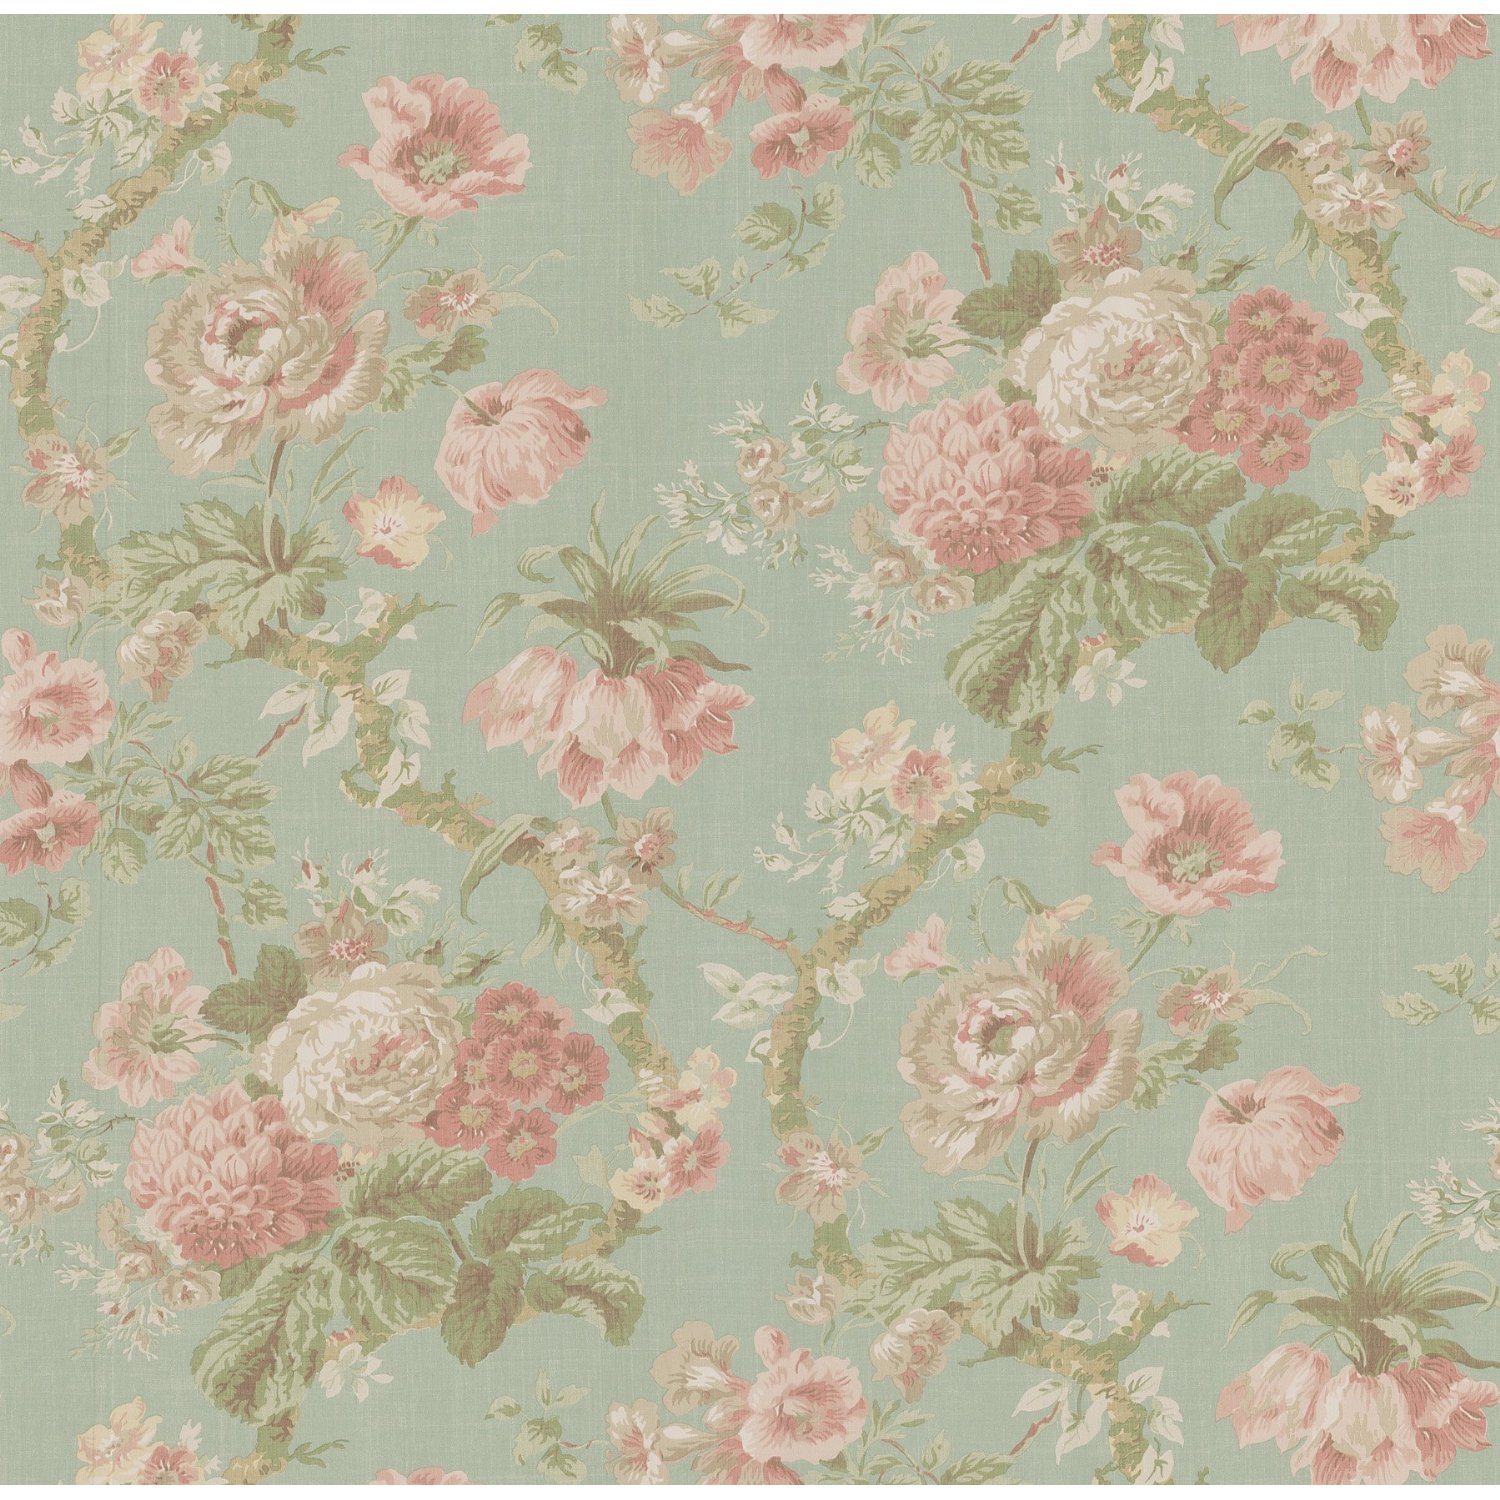  vintage and came up with this vintage floral wallpaper that and the